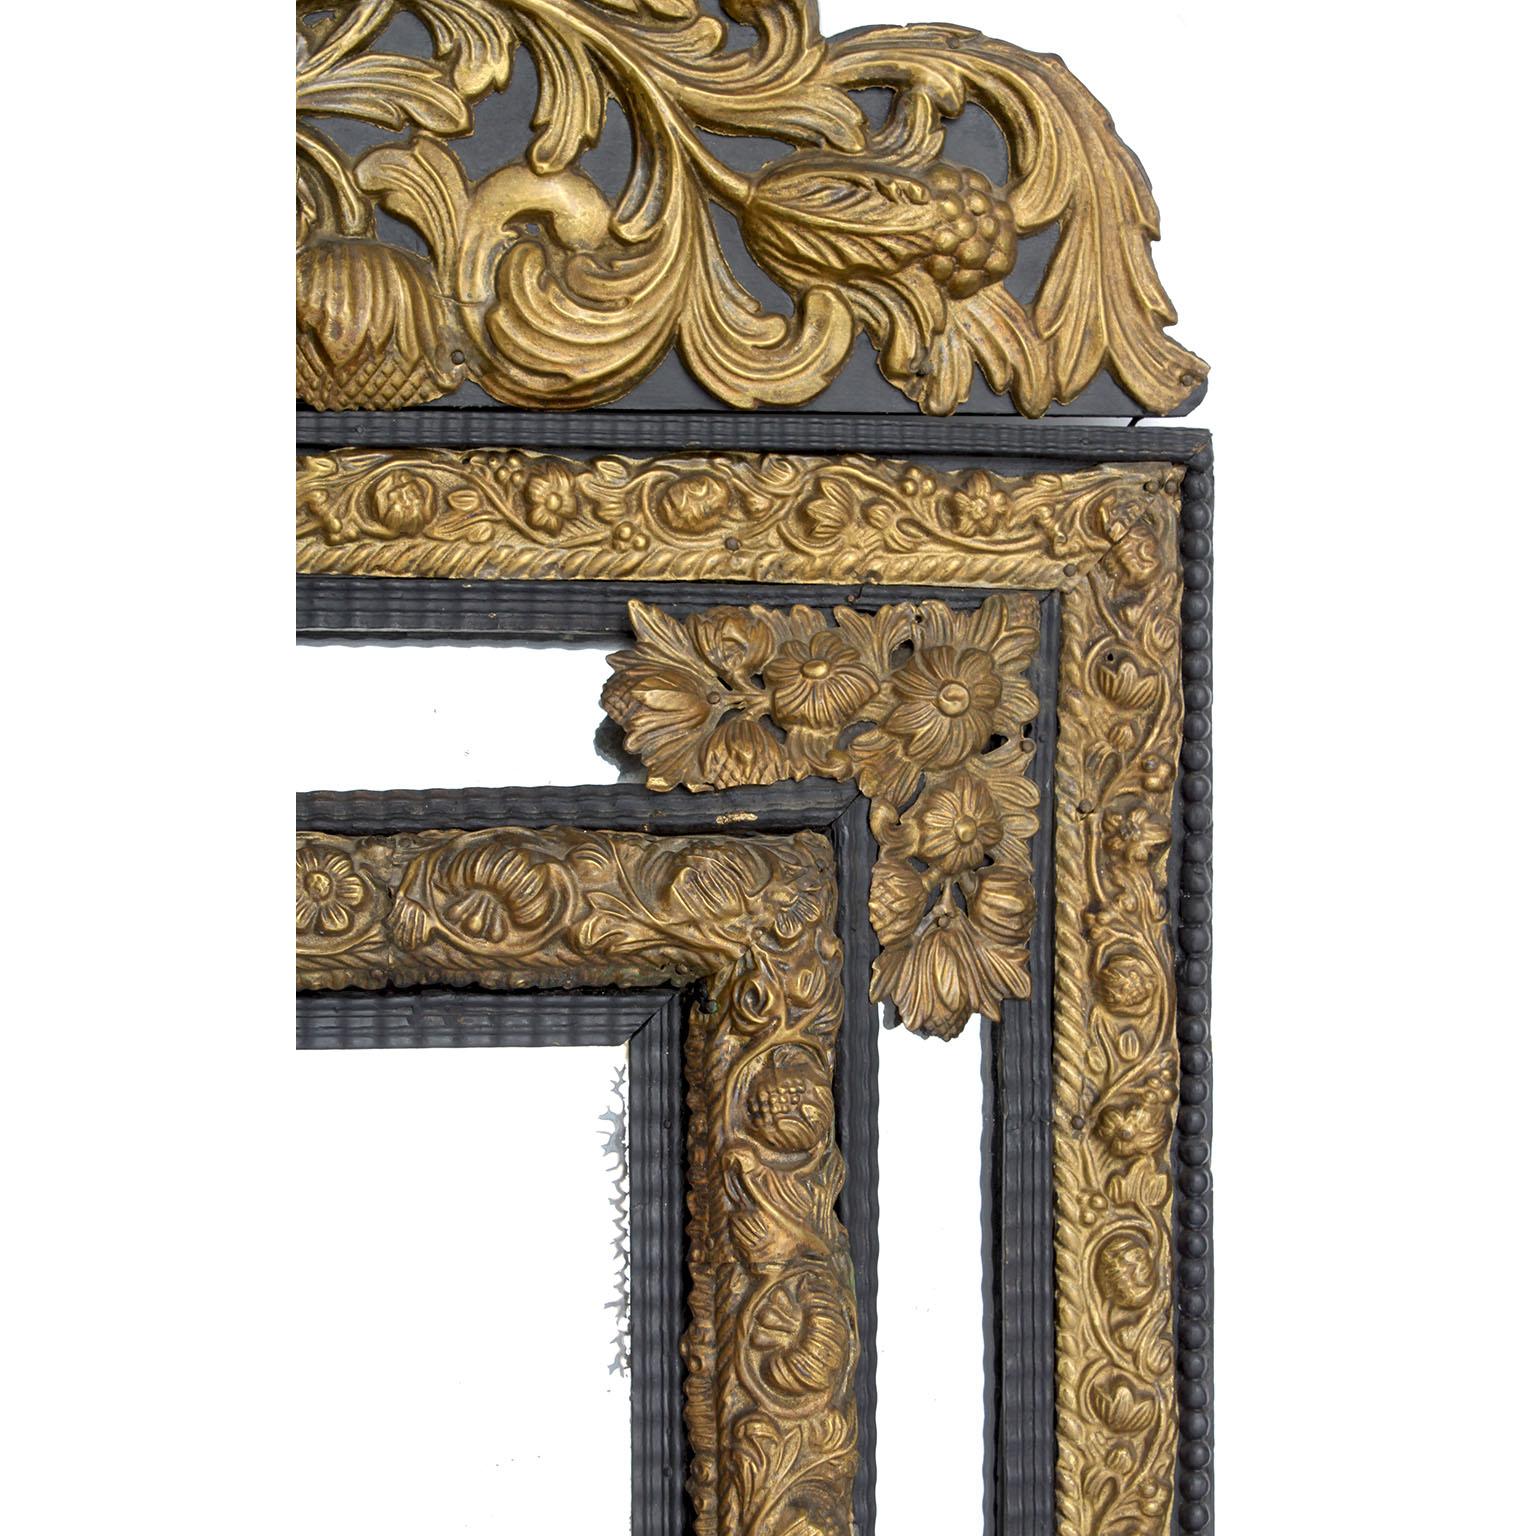 A French 19th Century Baroque Style Hammered Gilt-Brass Repoussé Mirror Frame In Good Condition For Sale In Los Angeles, CA